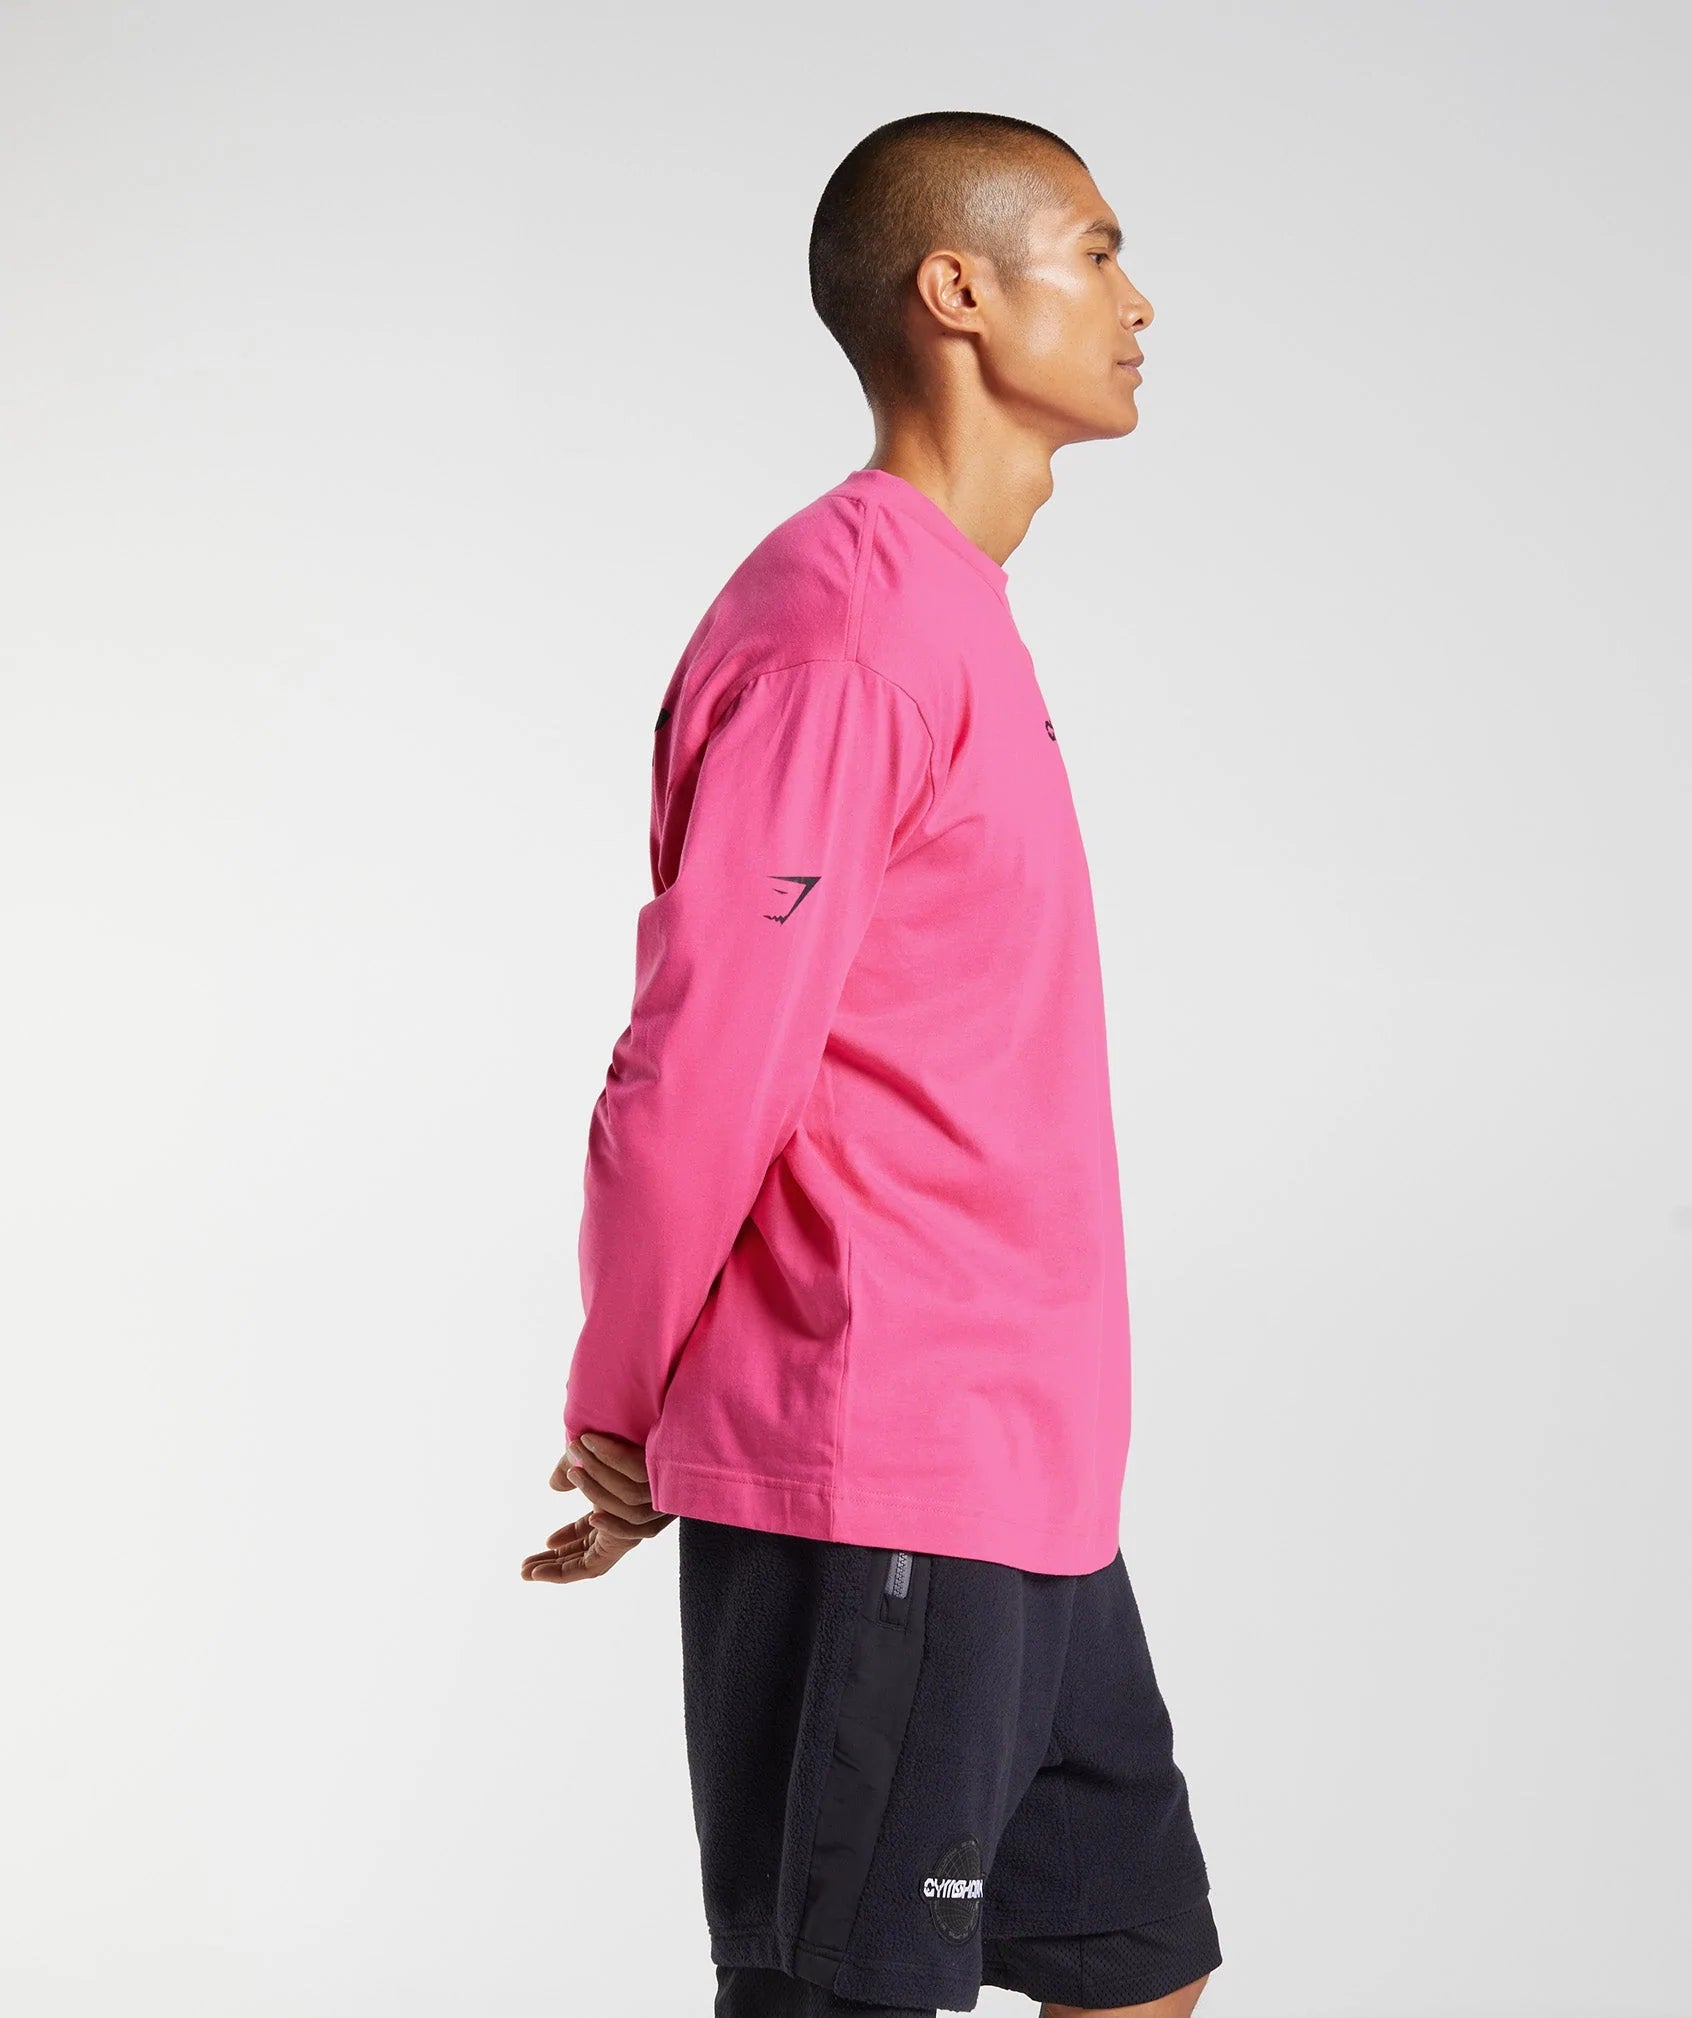 Vibes Long Sleeve T-Shirt in Bright Fuchsia - view 2